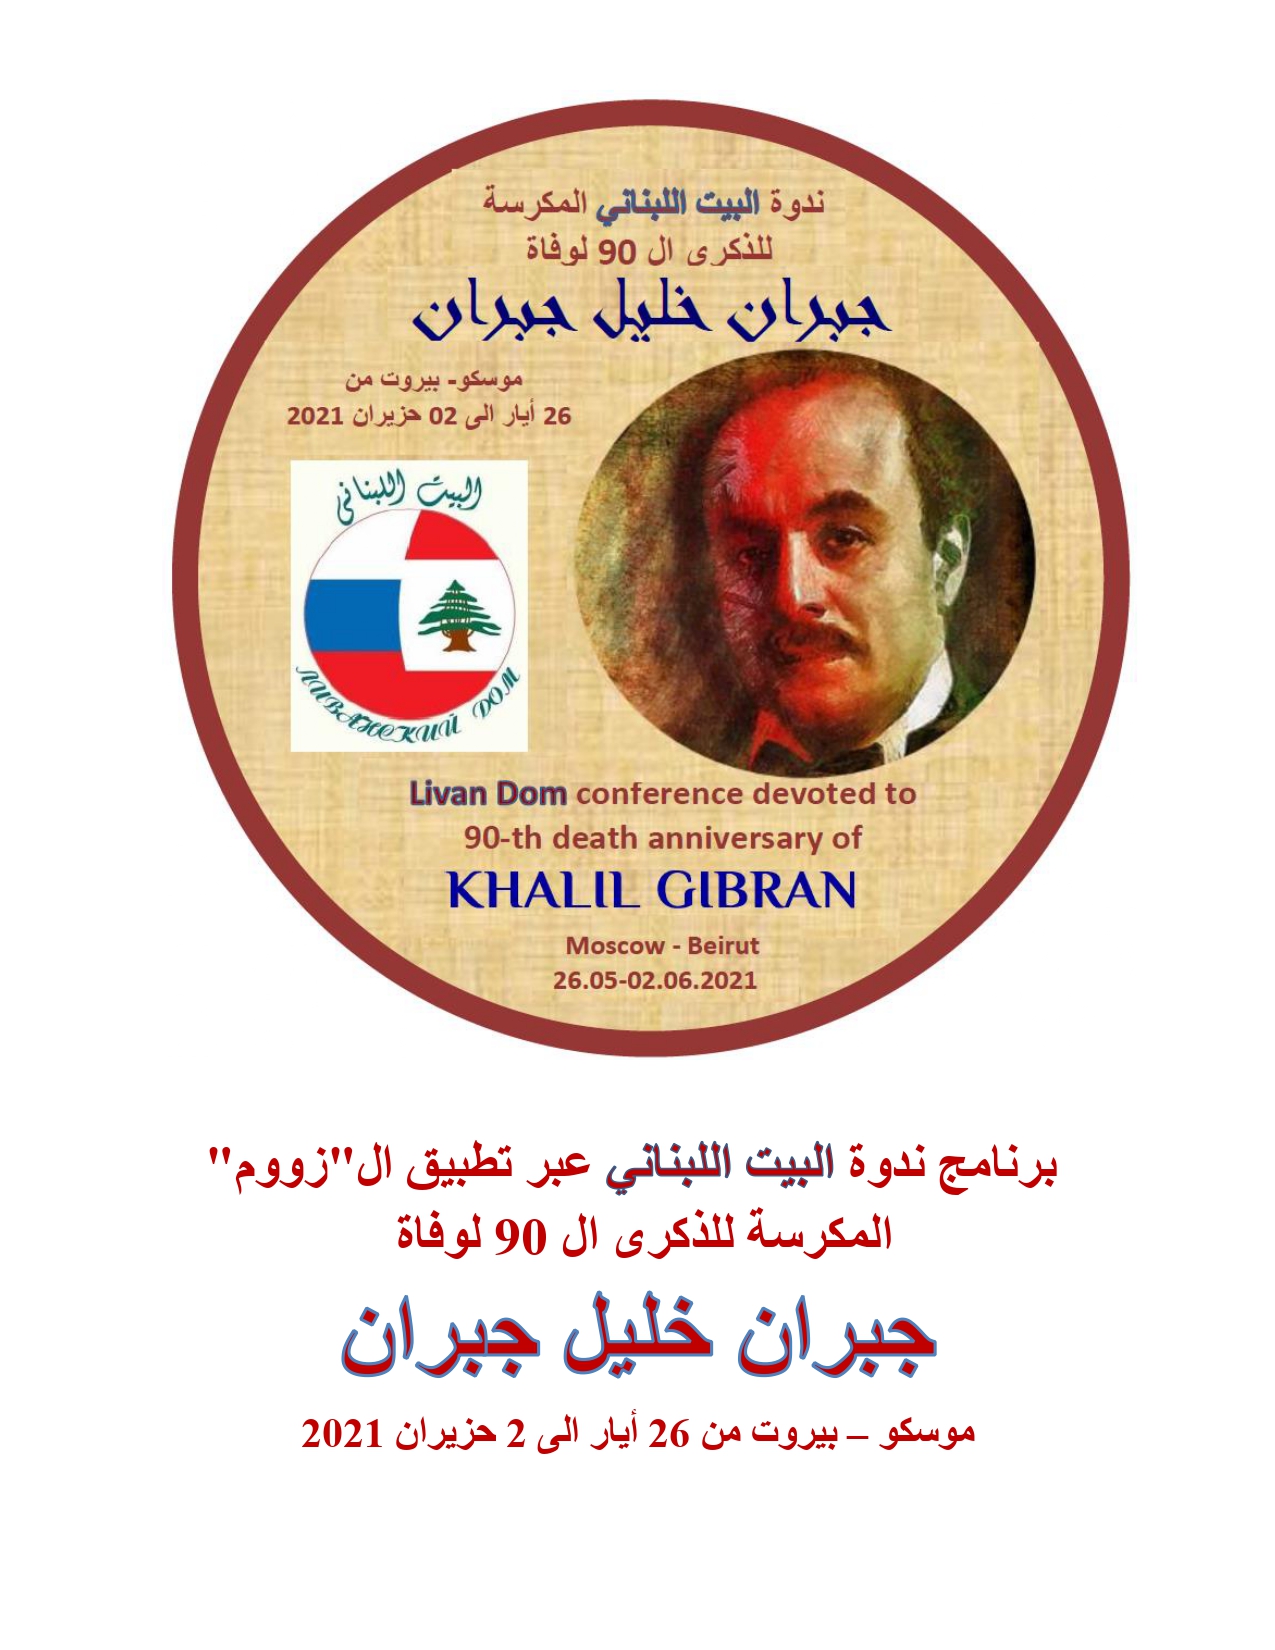 Gibran International Academic Conference (Program), Lebanese House, Moscow, May 26-27 and June 1-2, 2021